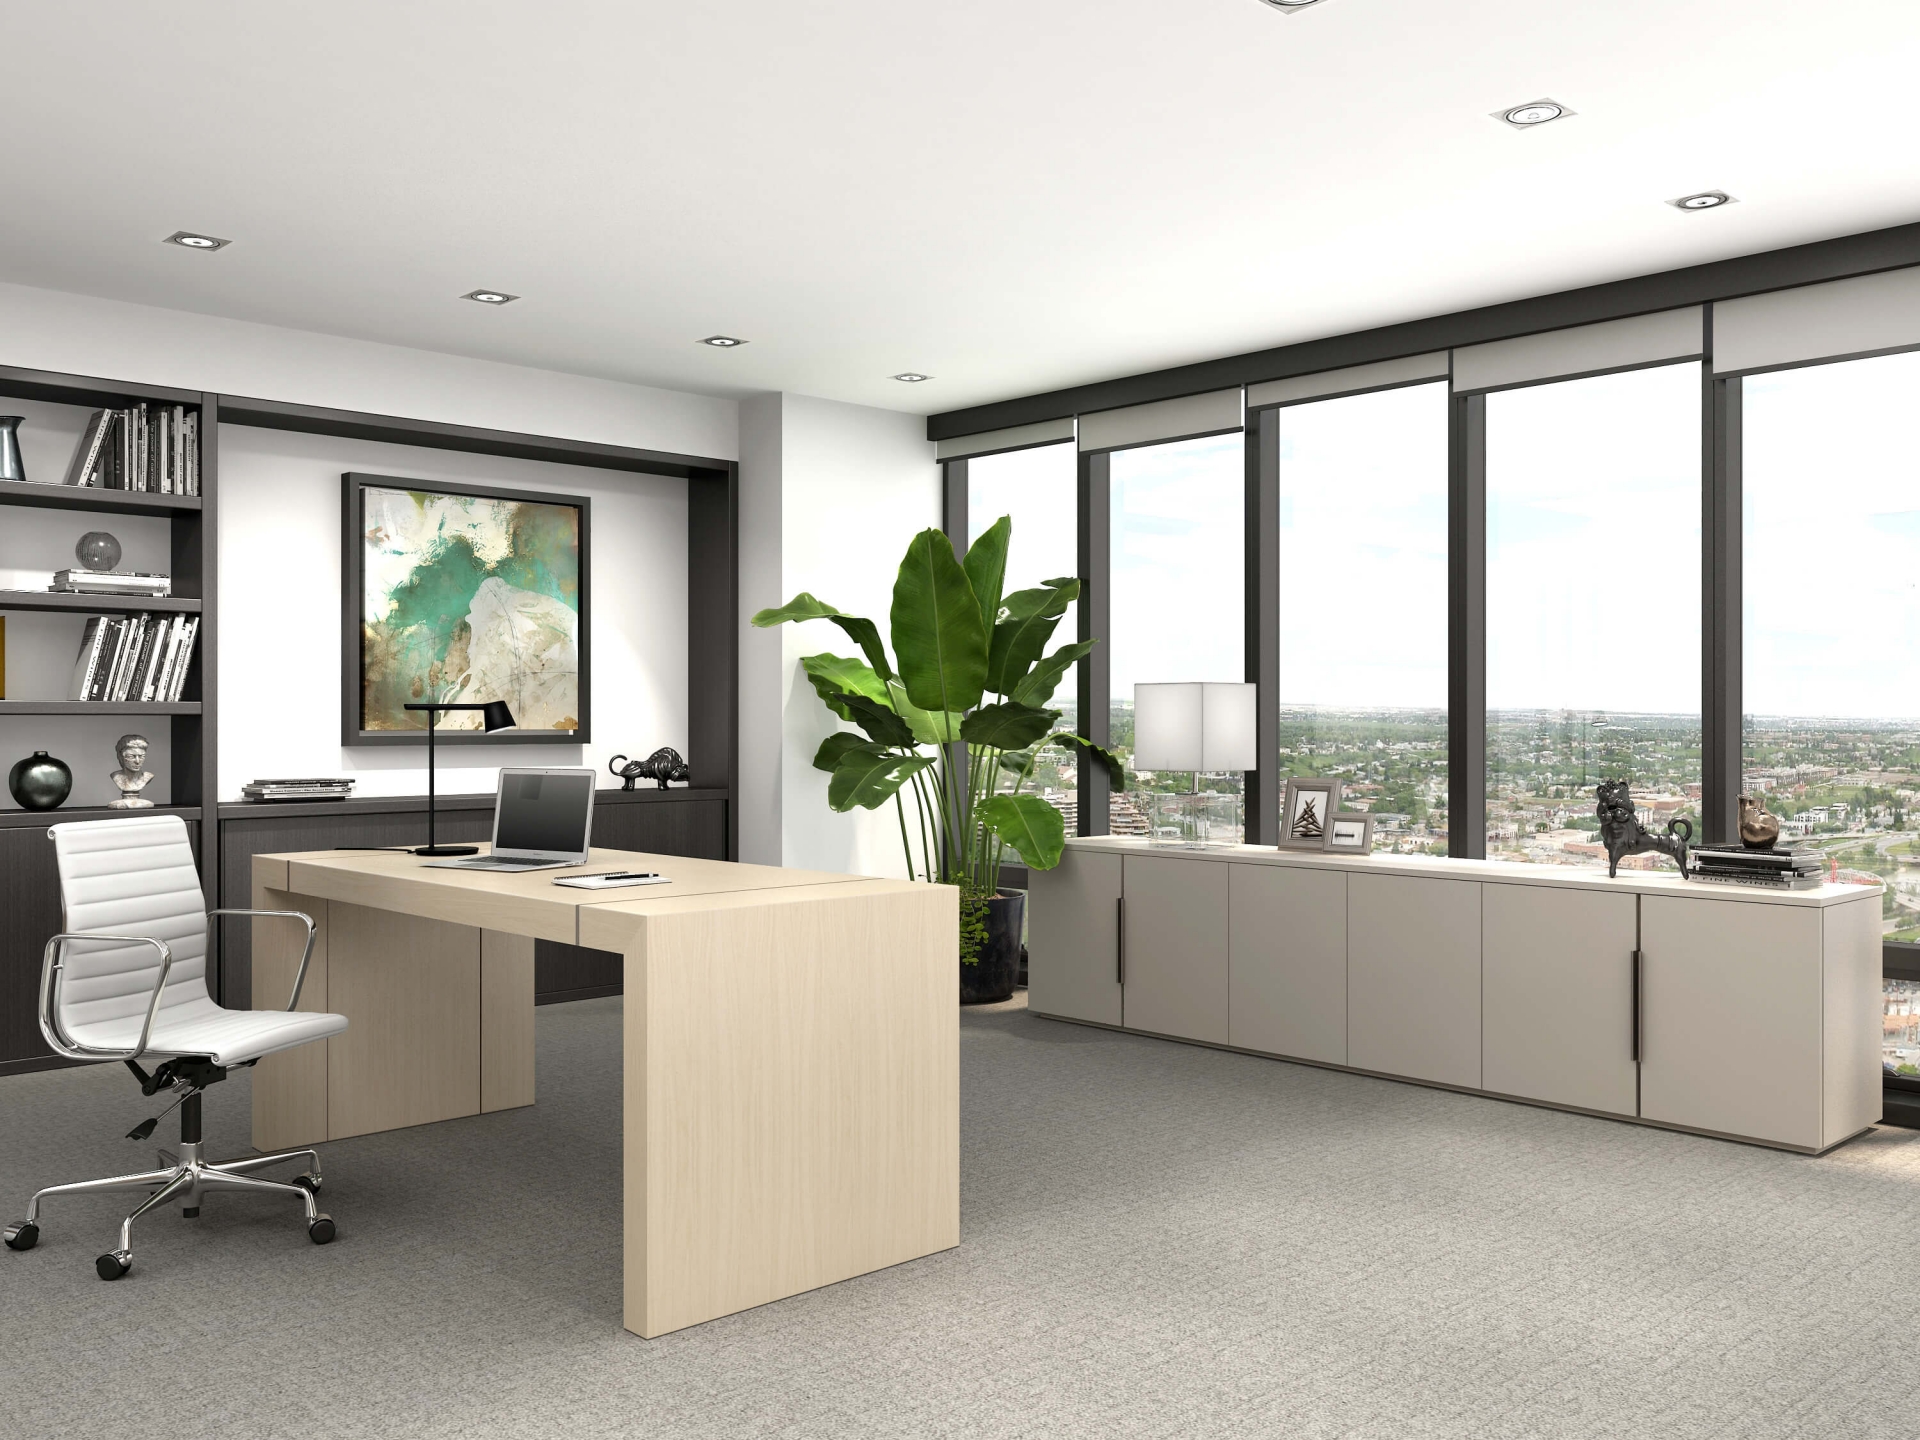 Tesano_Forena_Private_Office_Install.jpg feature